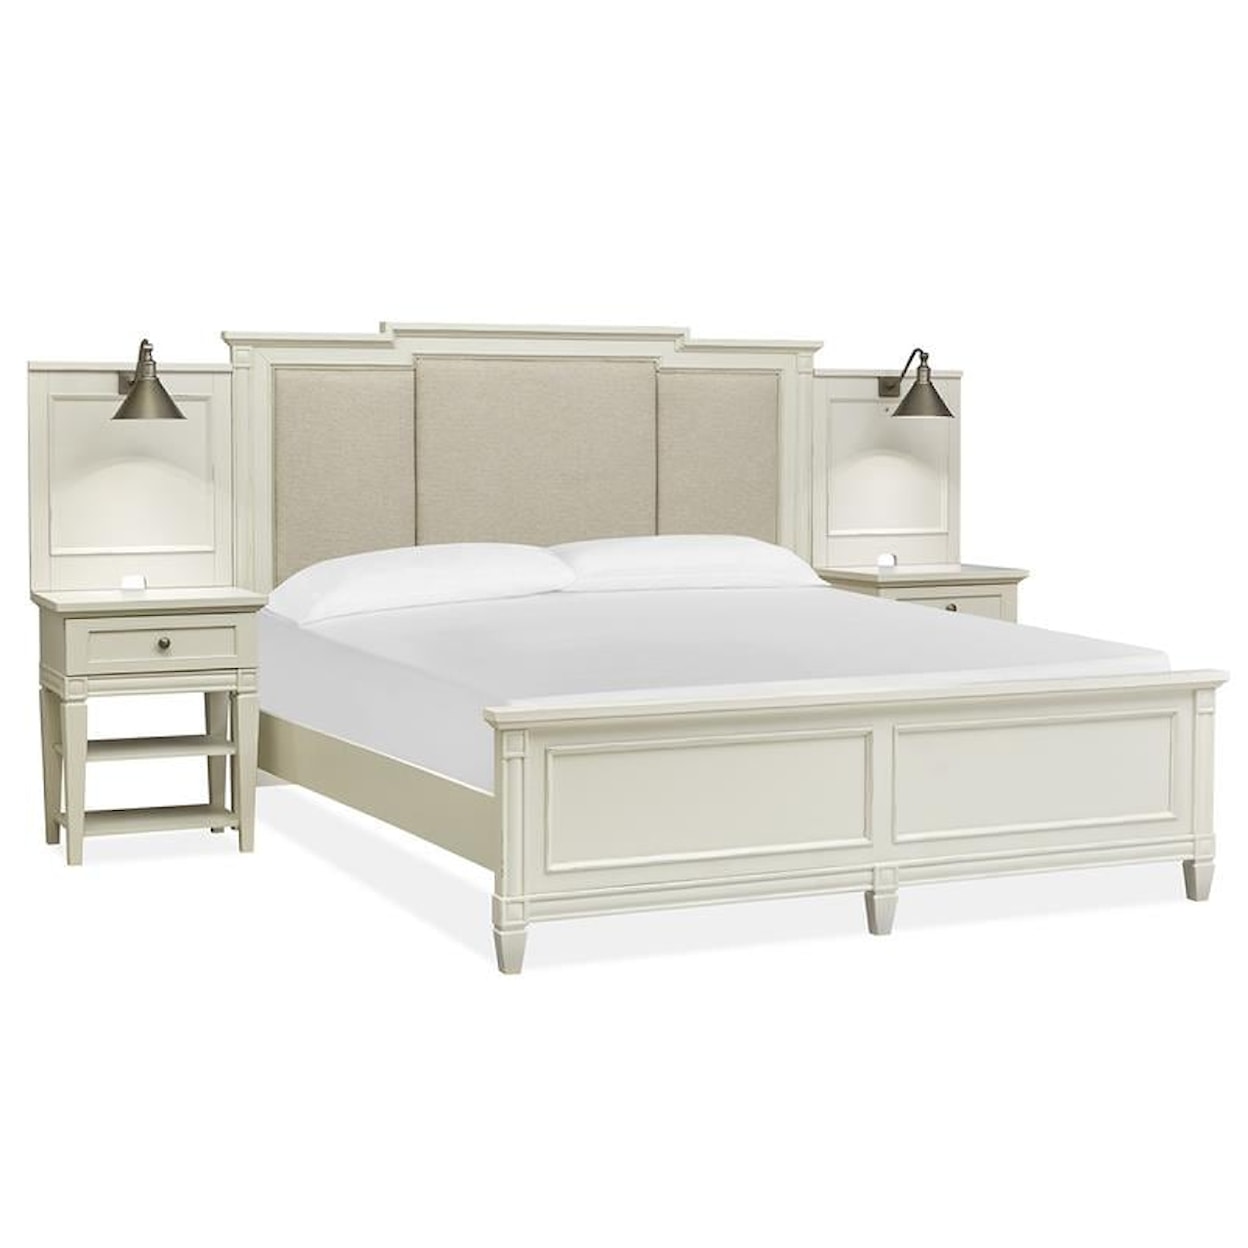 Magnussen Home Willowbrook Bedroom California King Upholstered Wall Bed